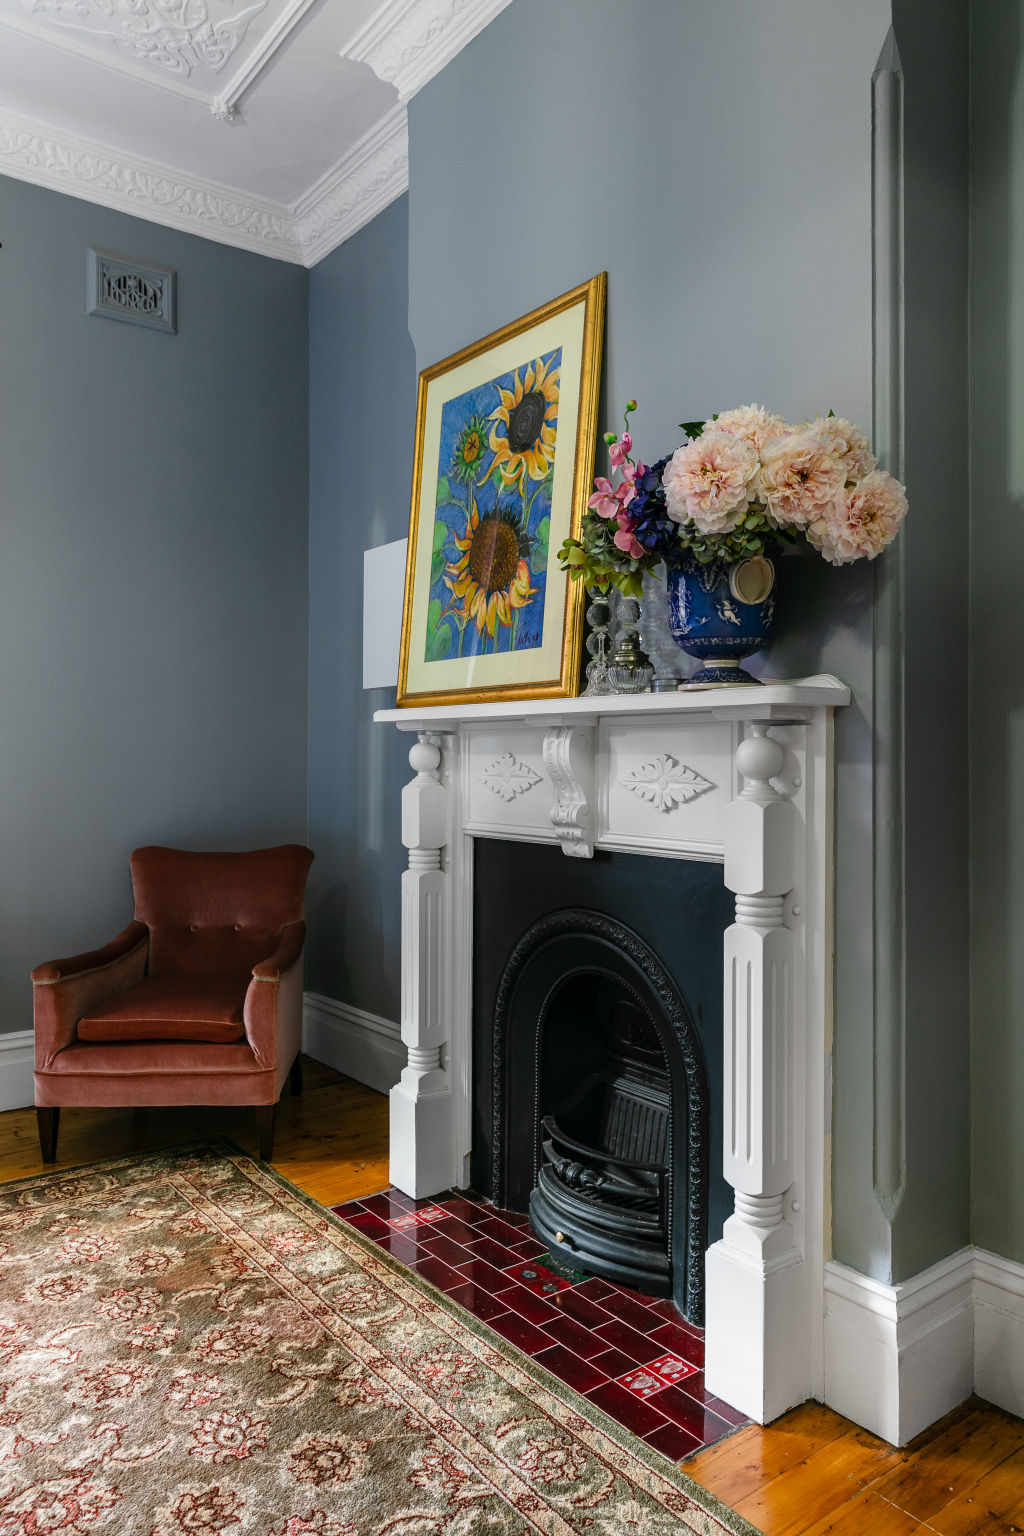 The living room features an original fireplace that the couple restored. Photo: Moss + Co Photography